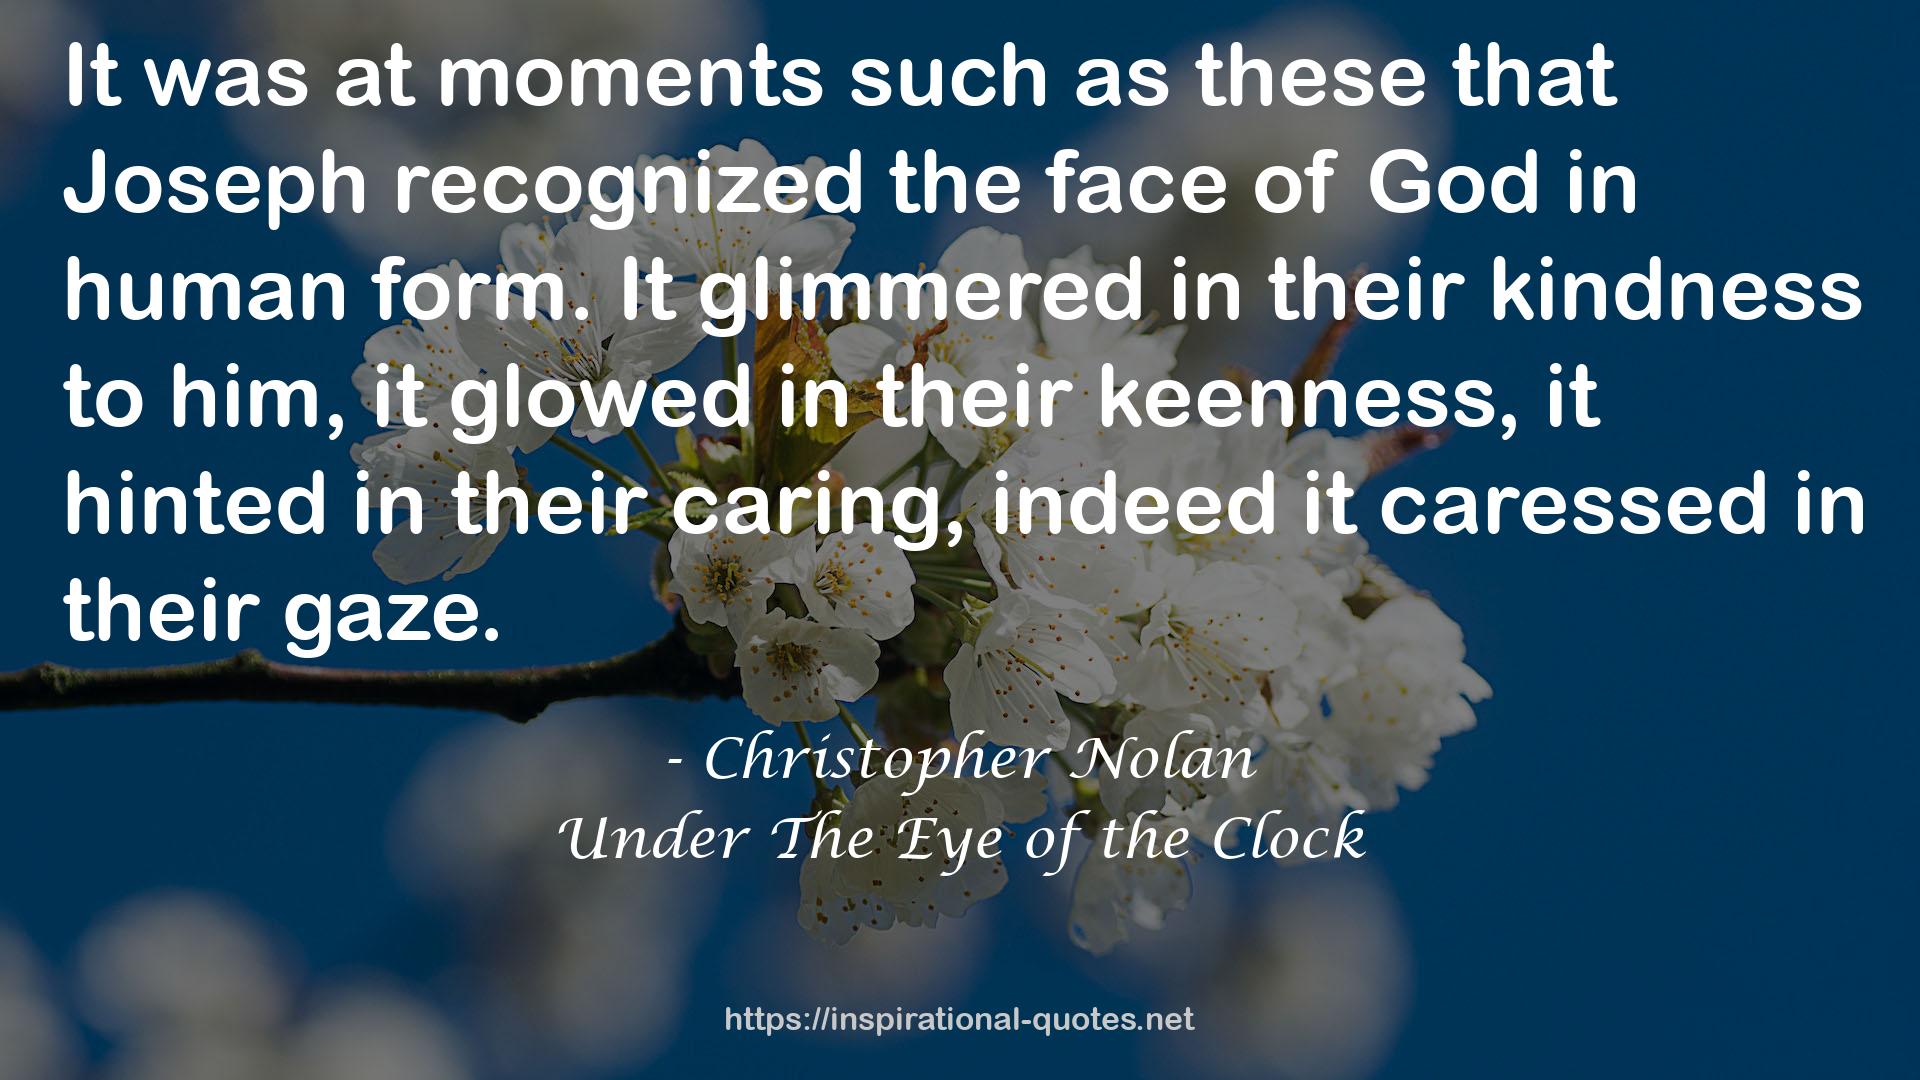 Under The Eye of the Clock QUOTES